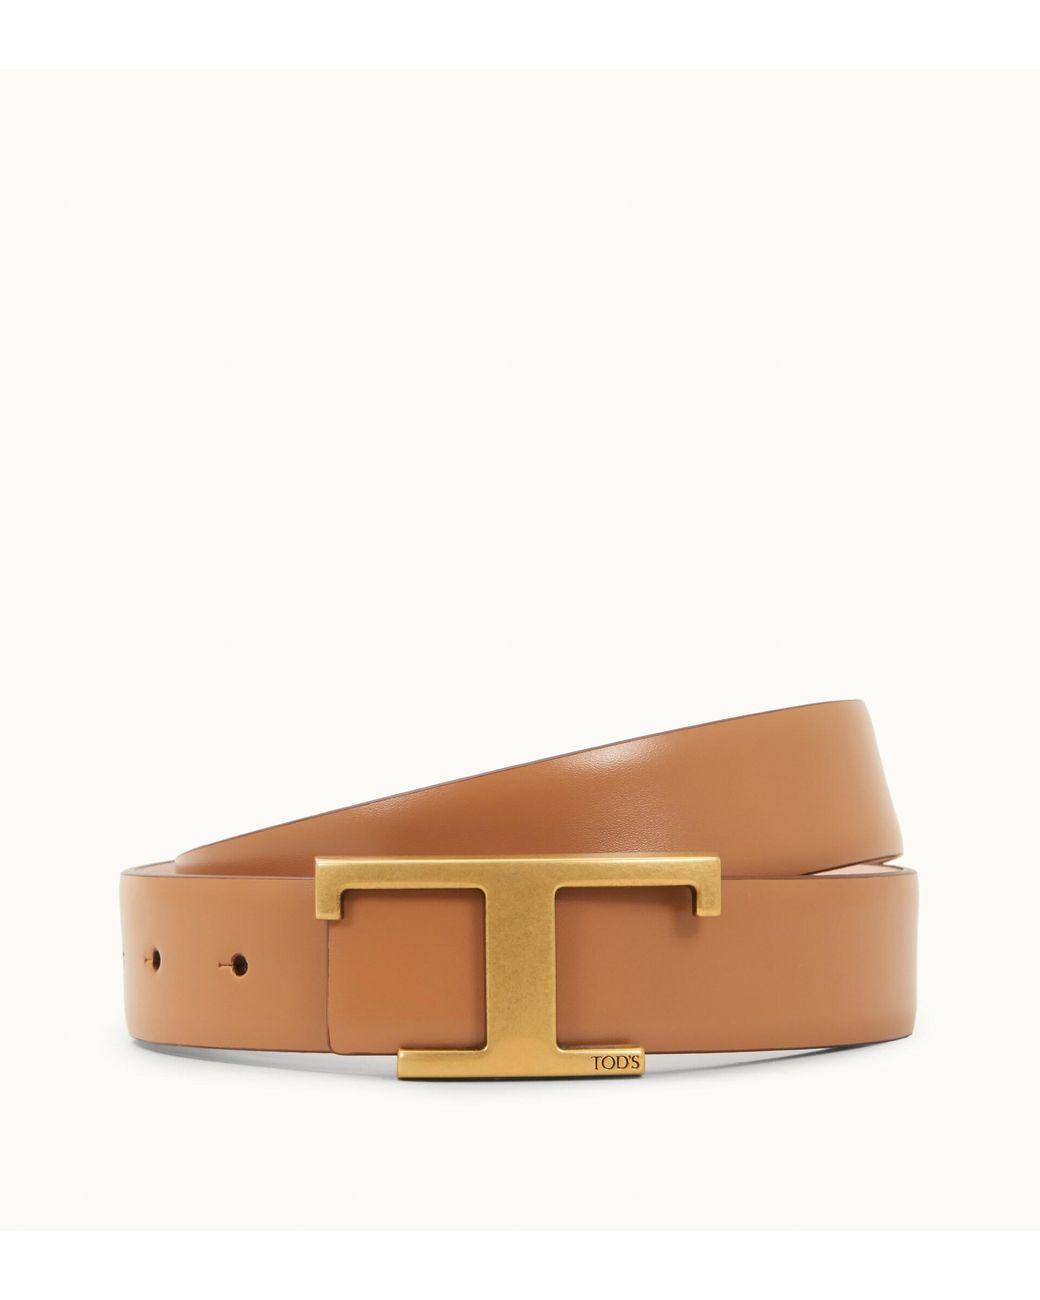 Tod's Belt In Leather in Brown - Lyst